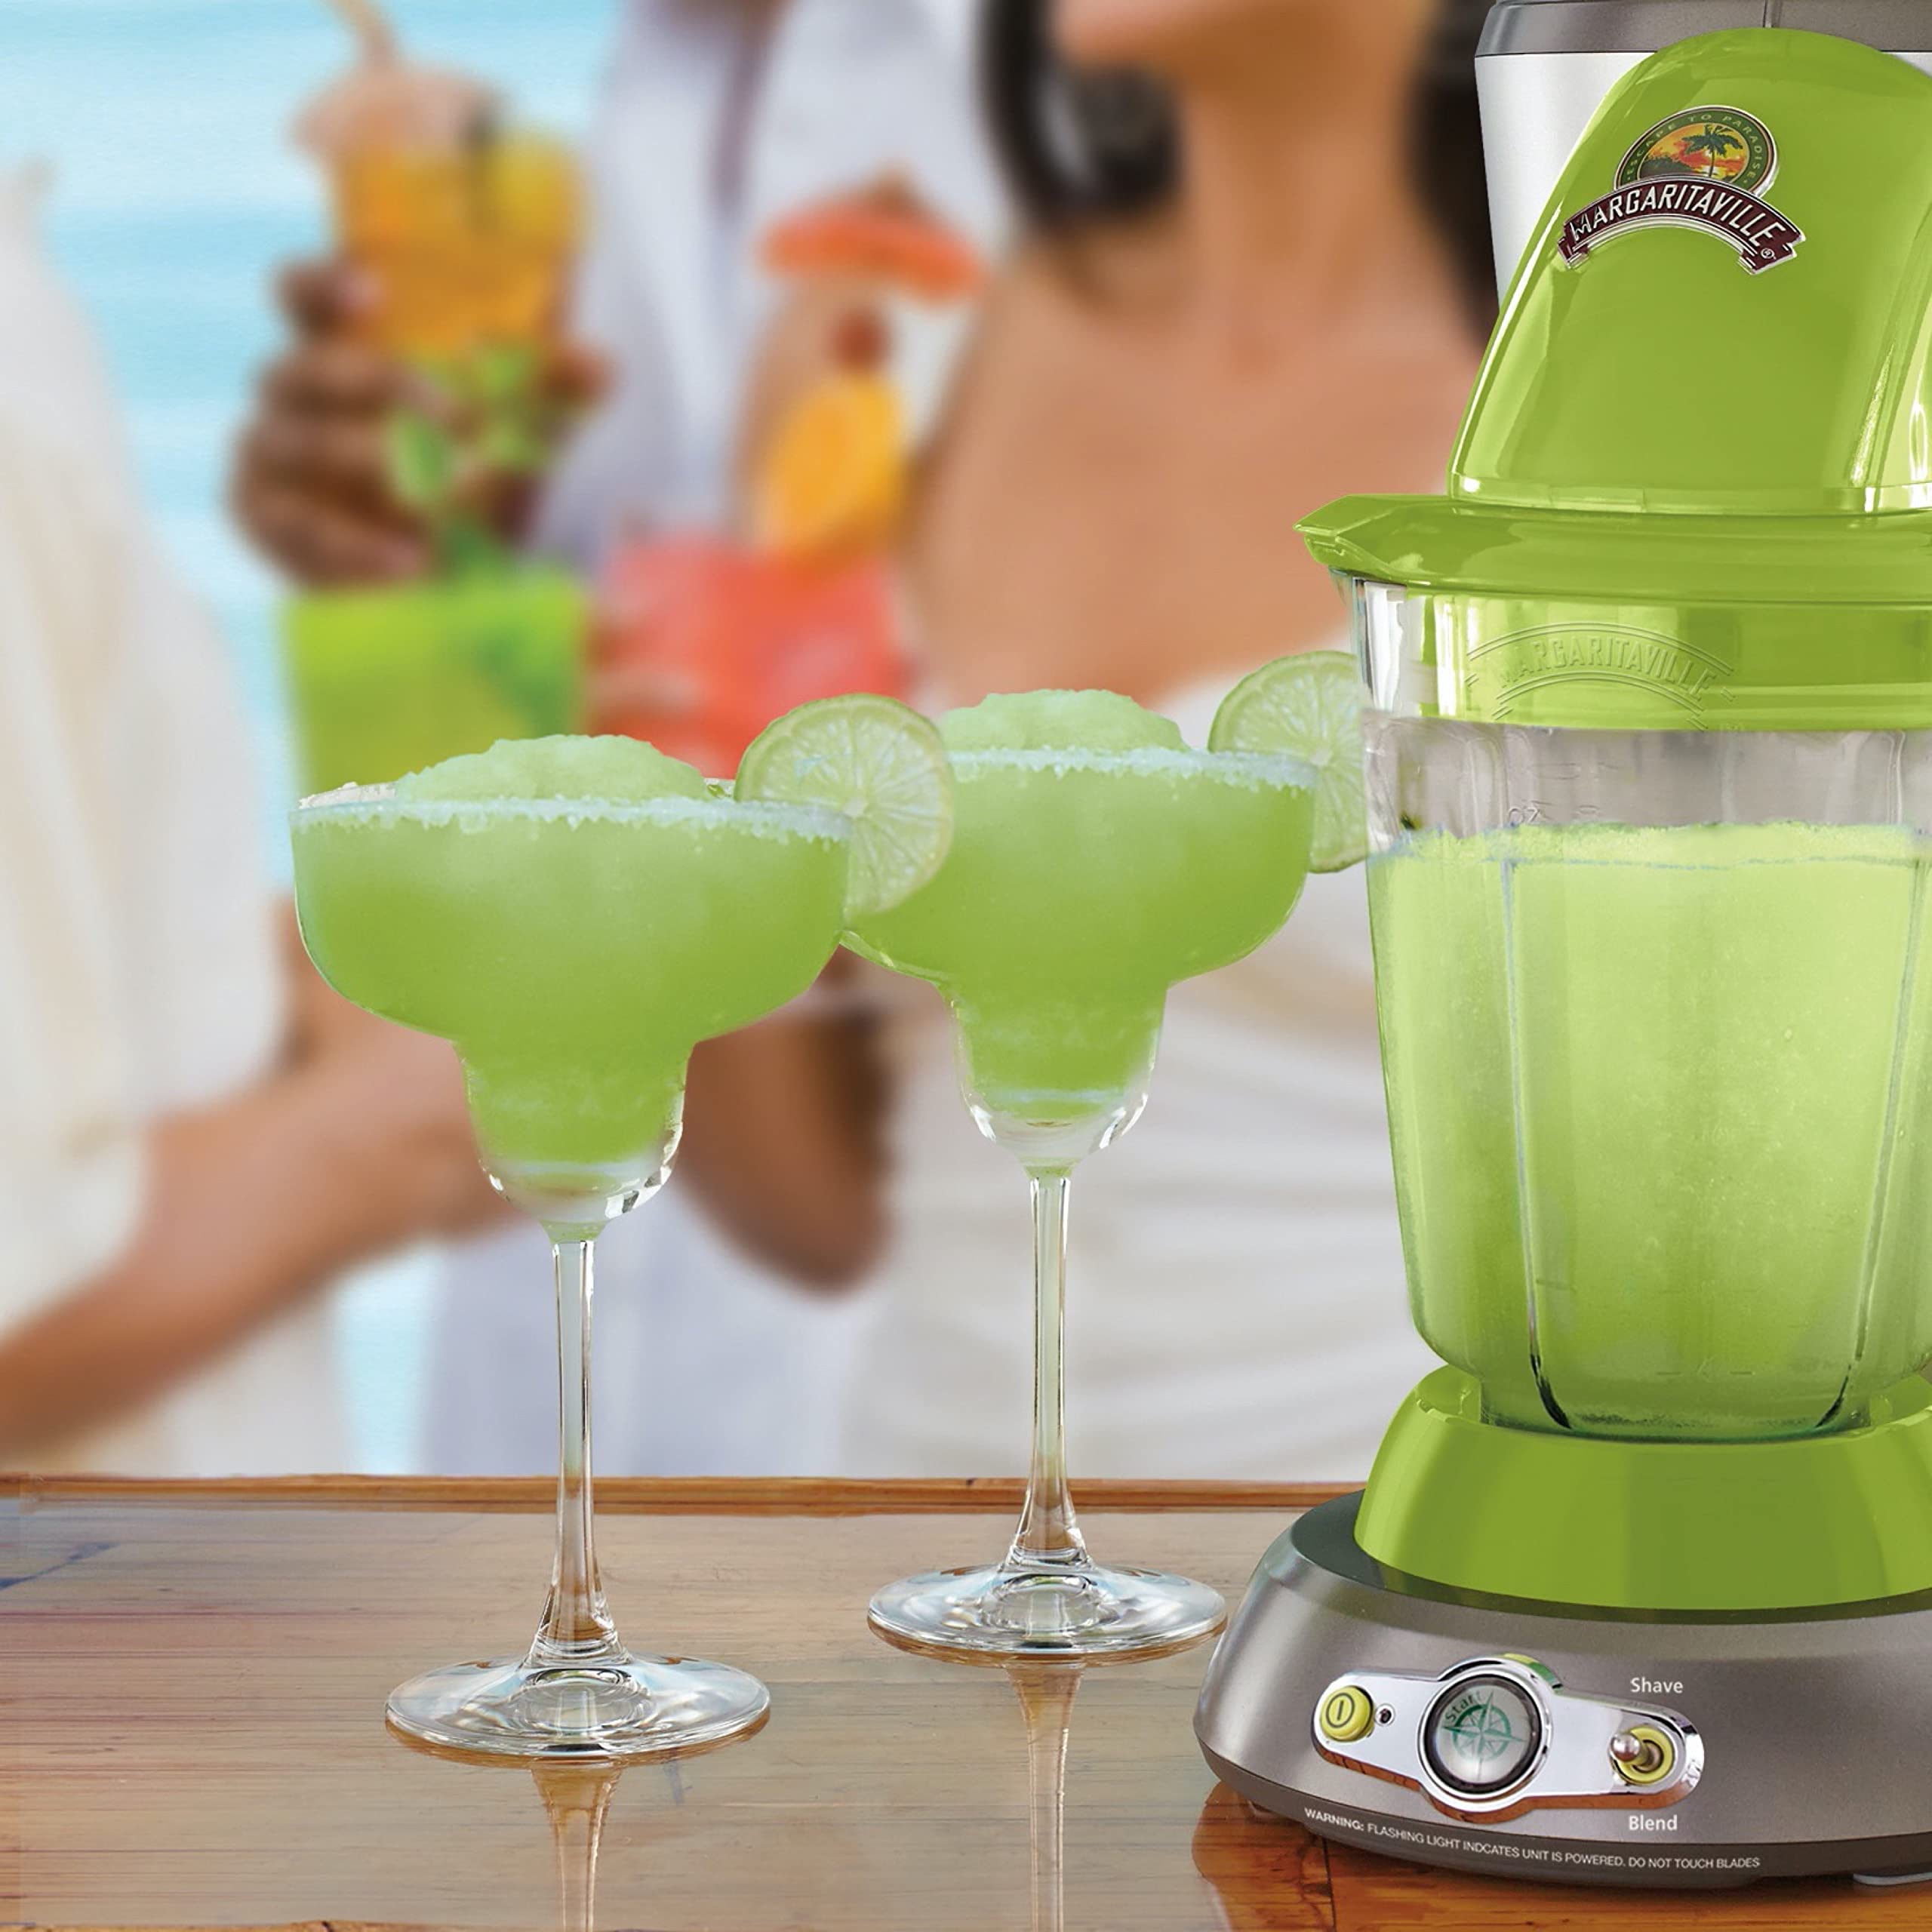 Margaritaville Bahamas Frozen Concoction Dual Mode Beverage Maker Home Margarita Machine with No-Brainer Mixer and, 36 Ounce Pitcher